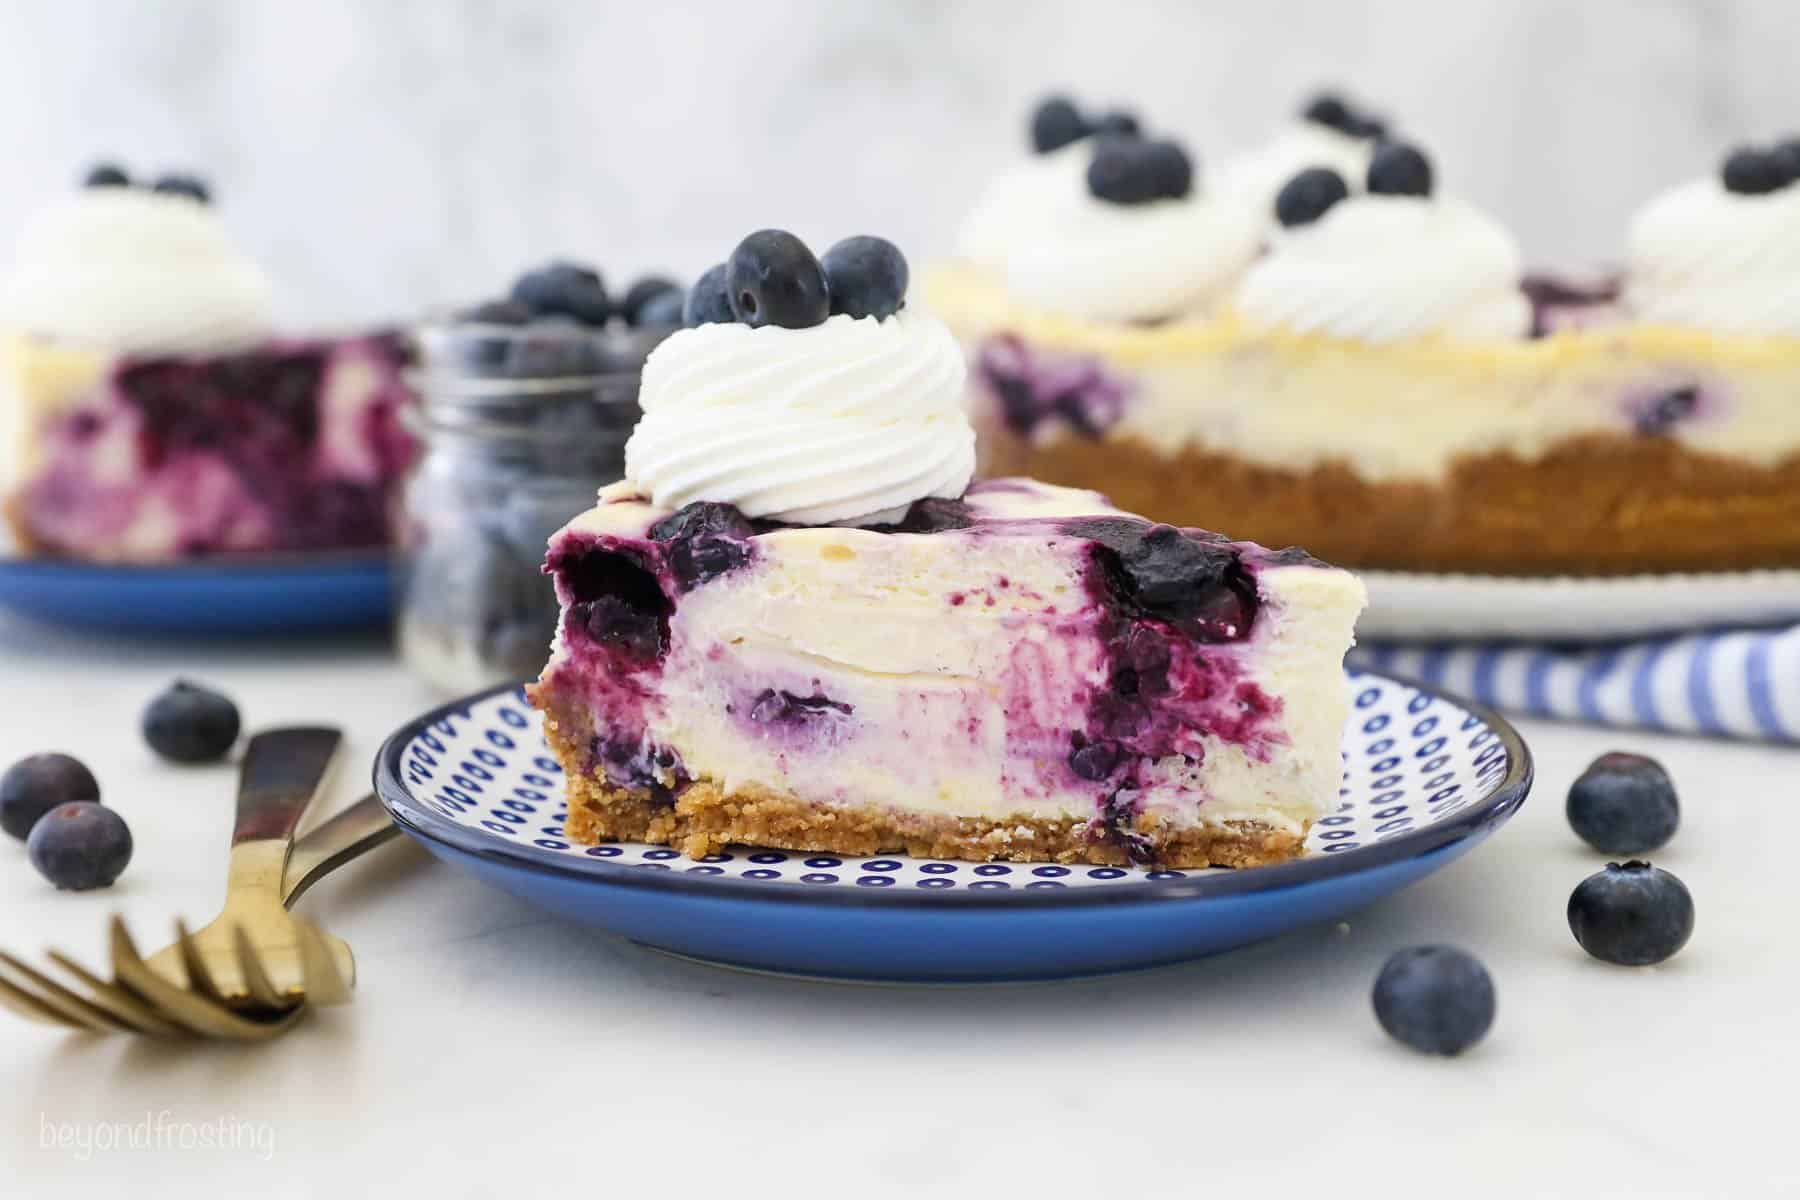 A blue polka dot plate surrounded by blueberries with a slice of blueberry cheesecake on the plate